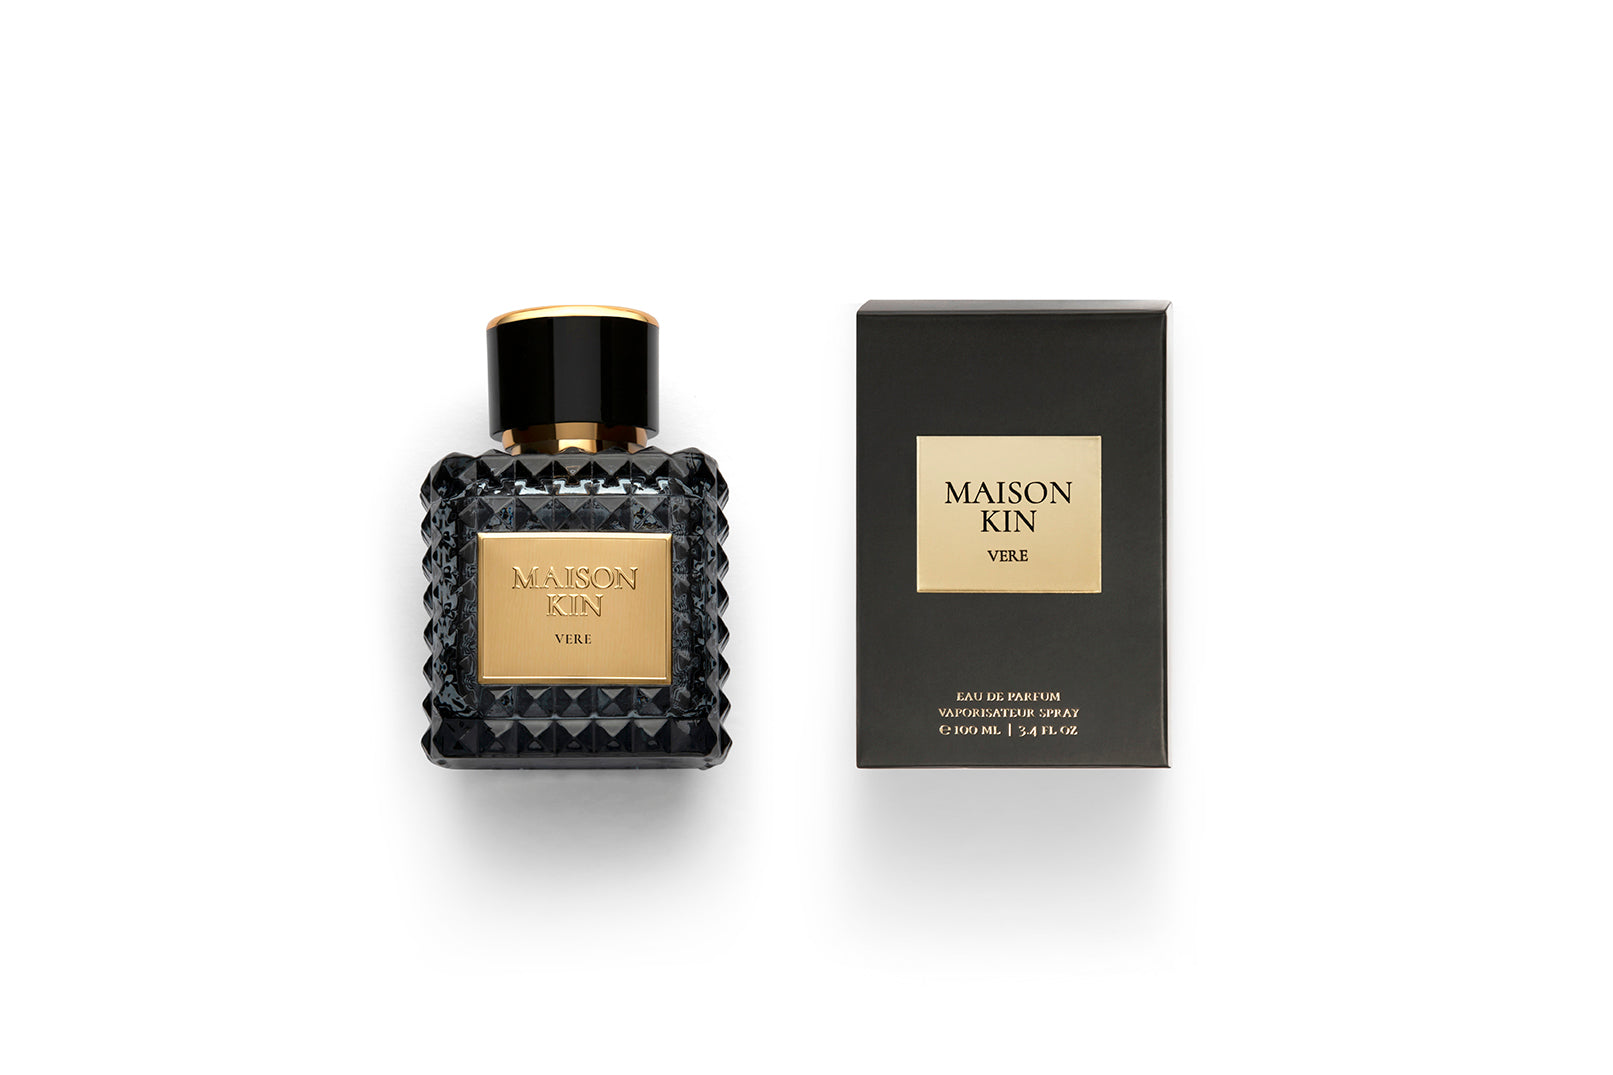 Inspired by Tom Ford's Tobacco Vanille | Vere Perfume | Maison Kin